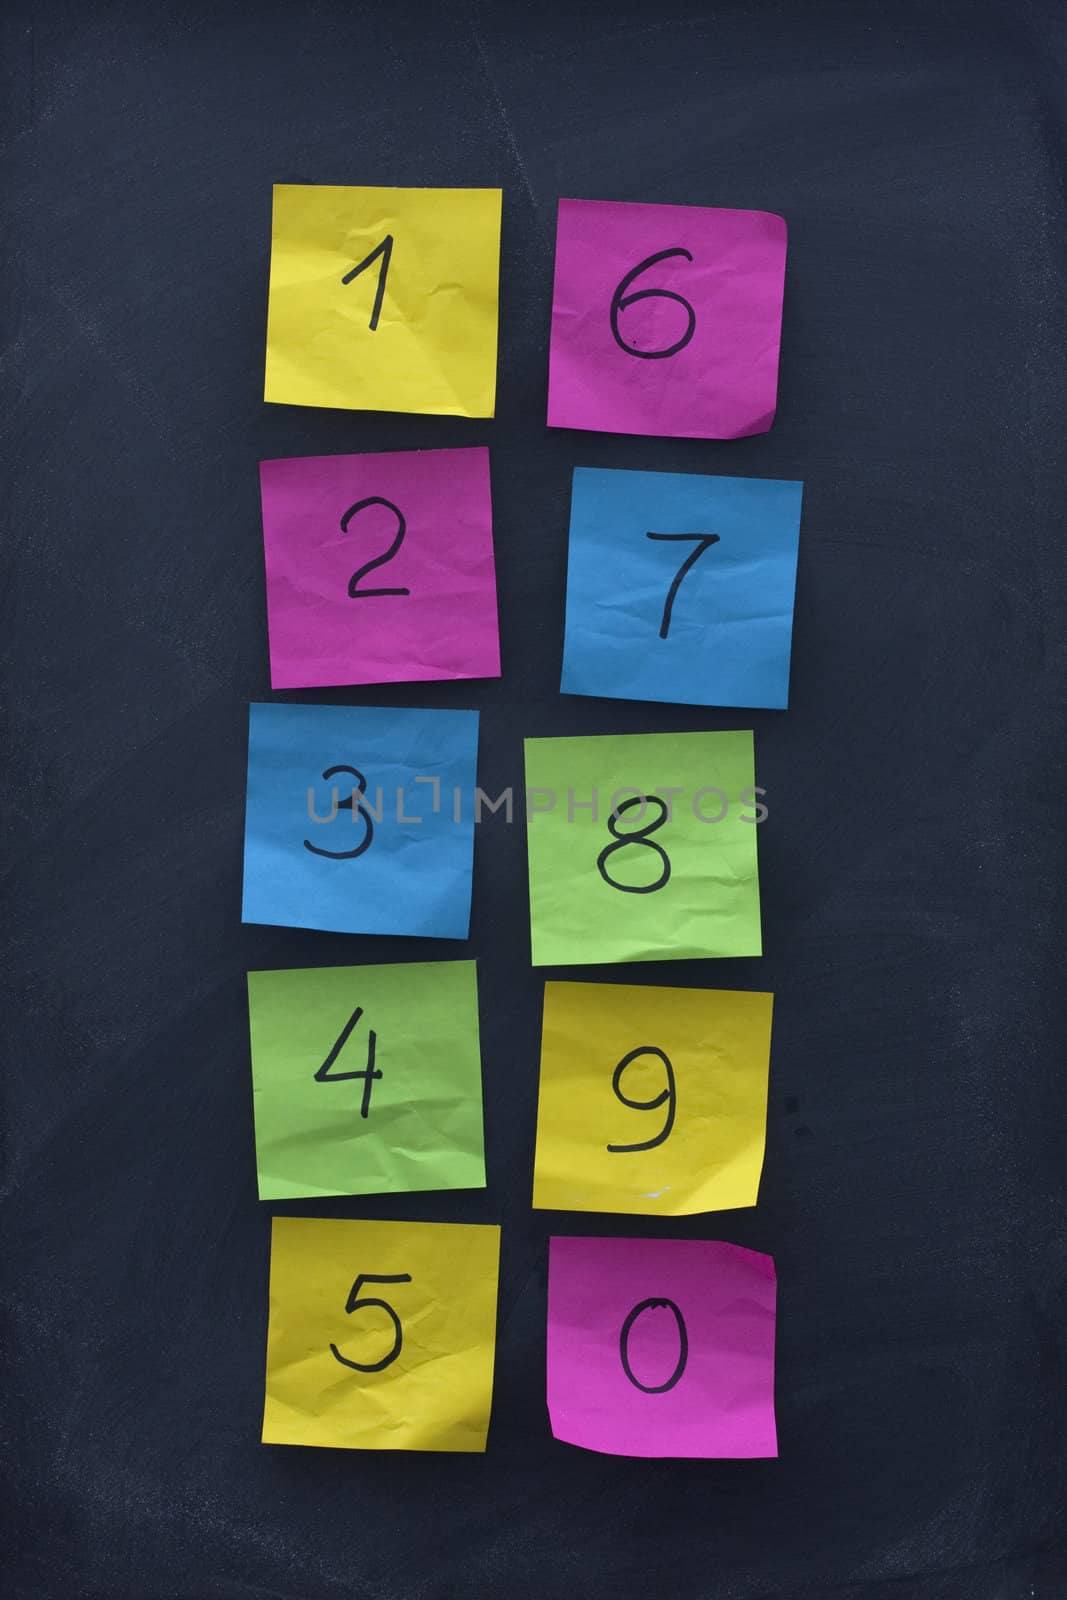 arabic numerals from zero to nine handwritten on colorful crumbled sticky notes and posted on blackboard with eraser smudges